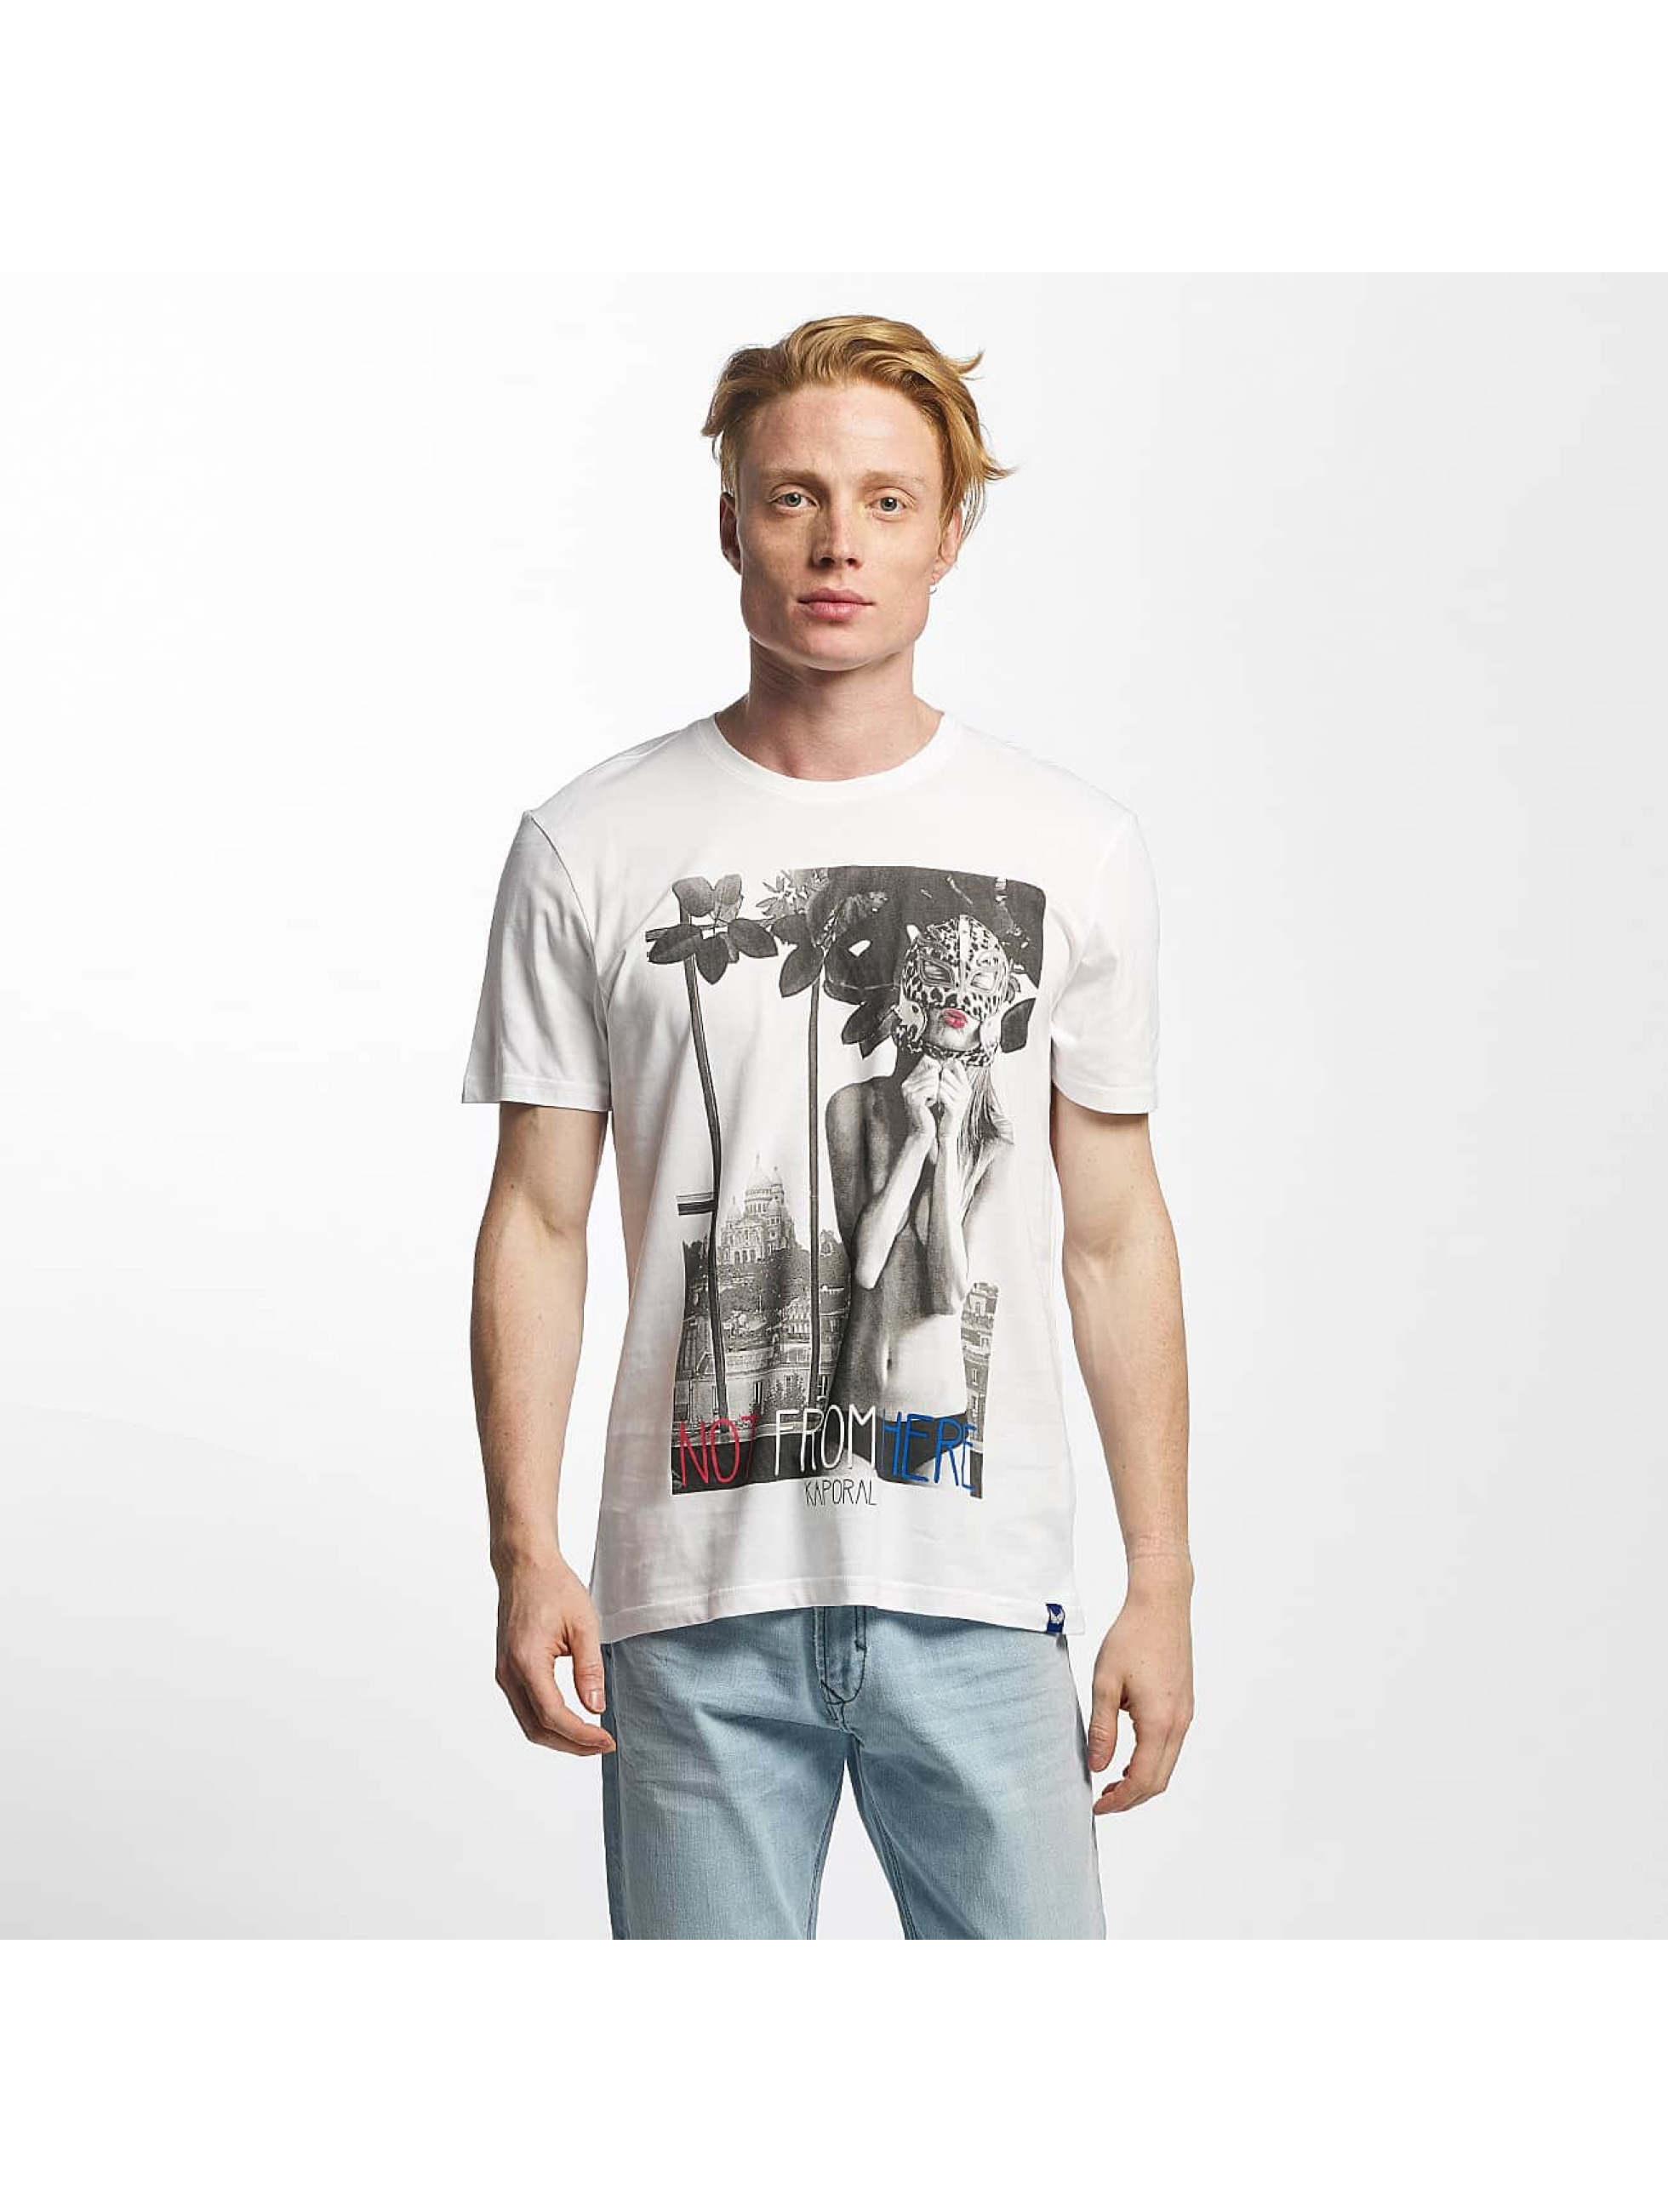 Kaporal Not From Here blanc T-Shirt homme